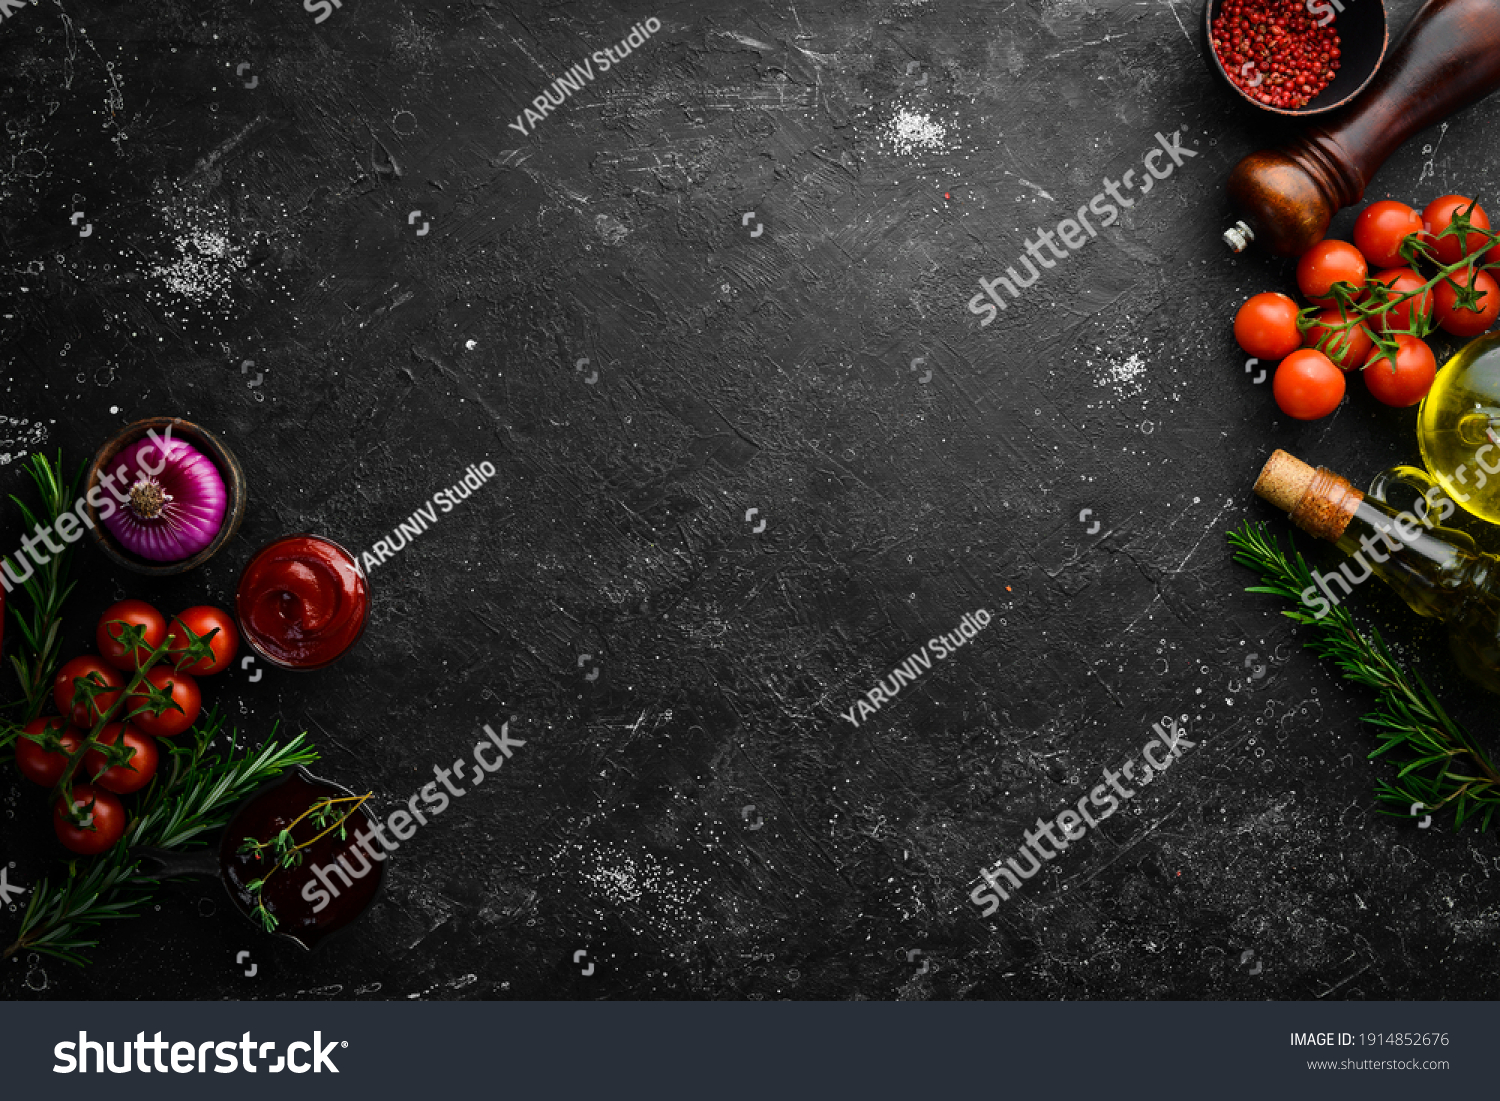 Black stone cooking background. Spices and vegetables. Top view. Free space for your text. #1914852676